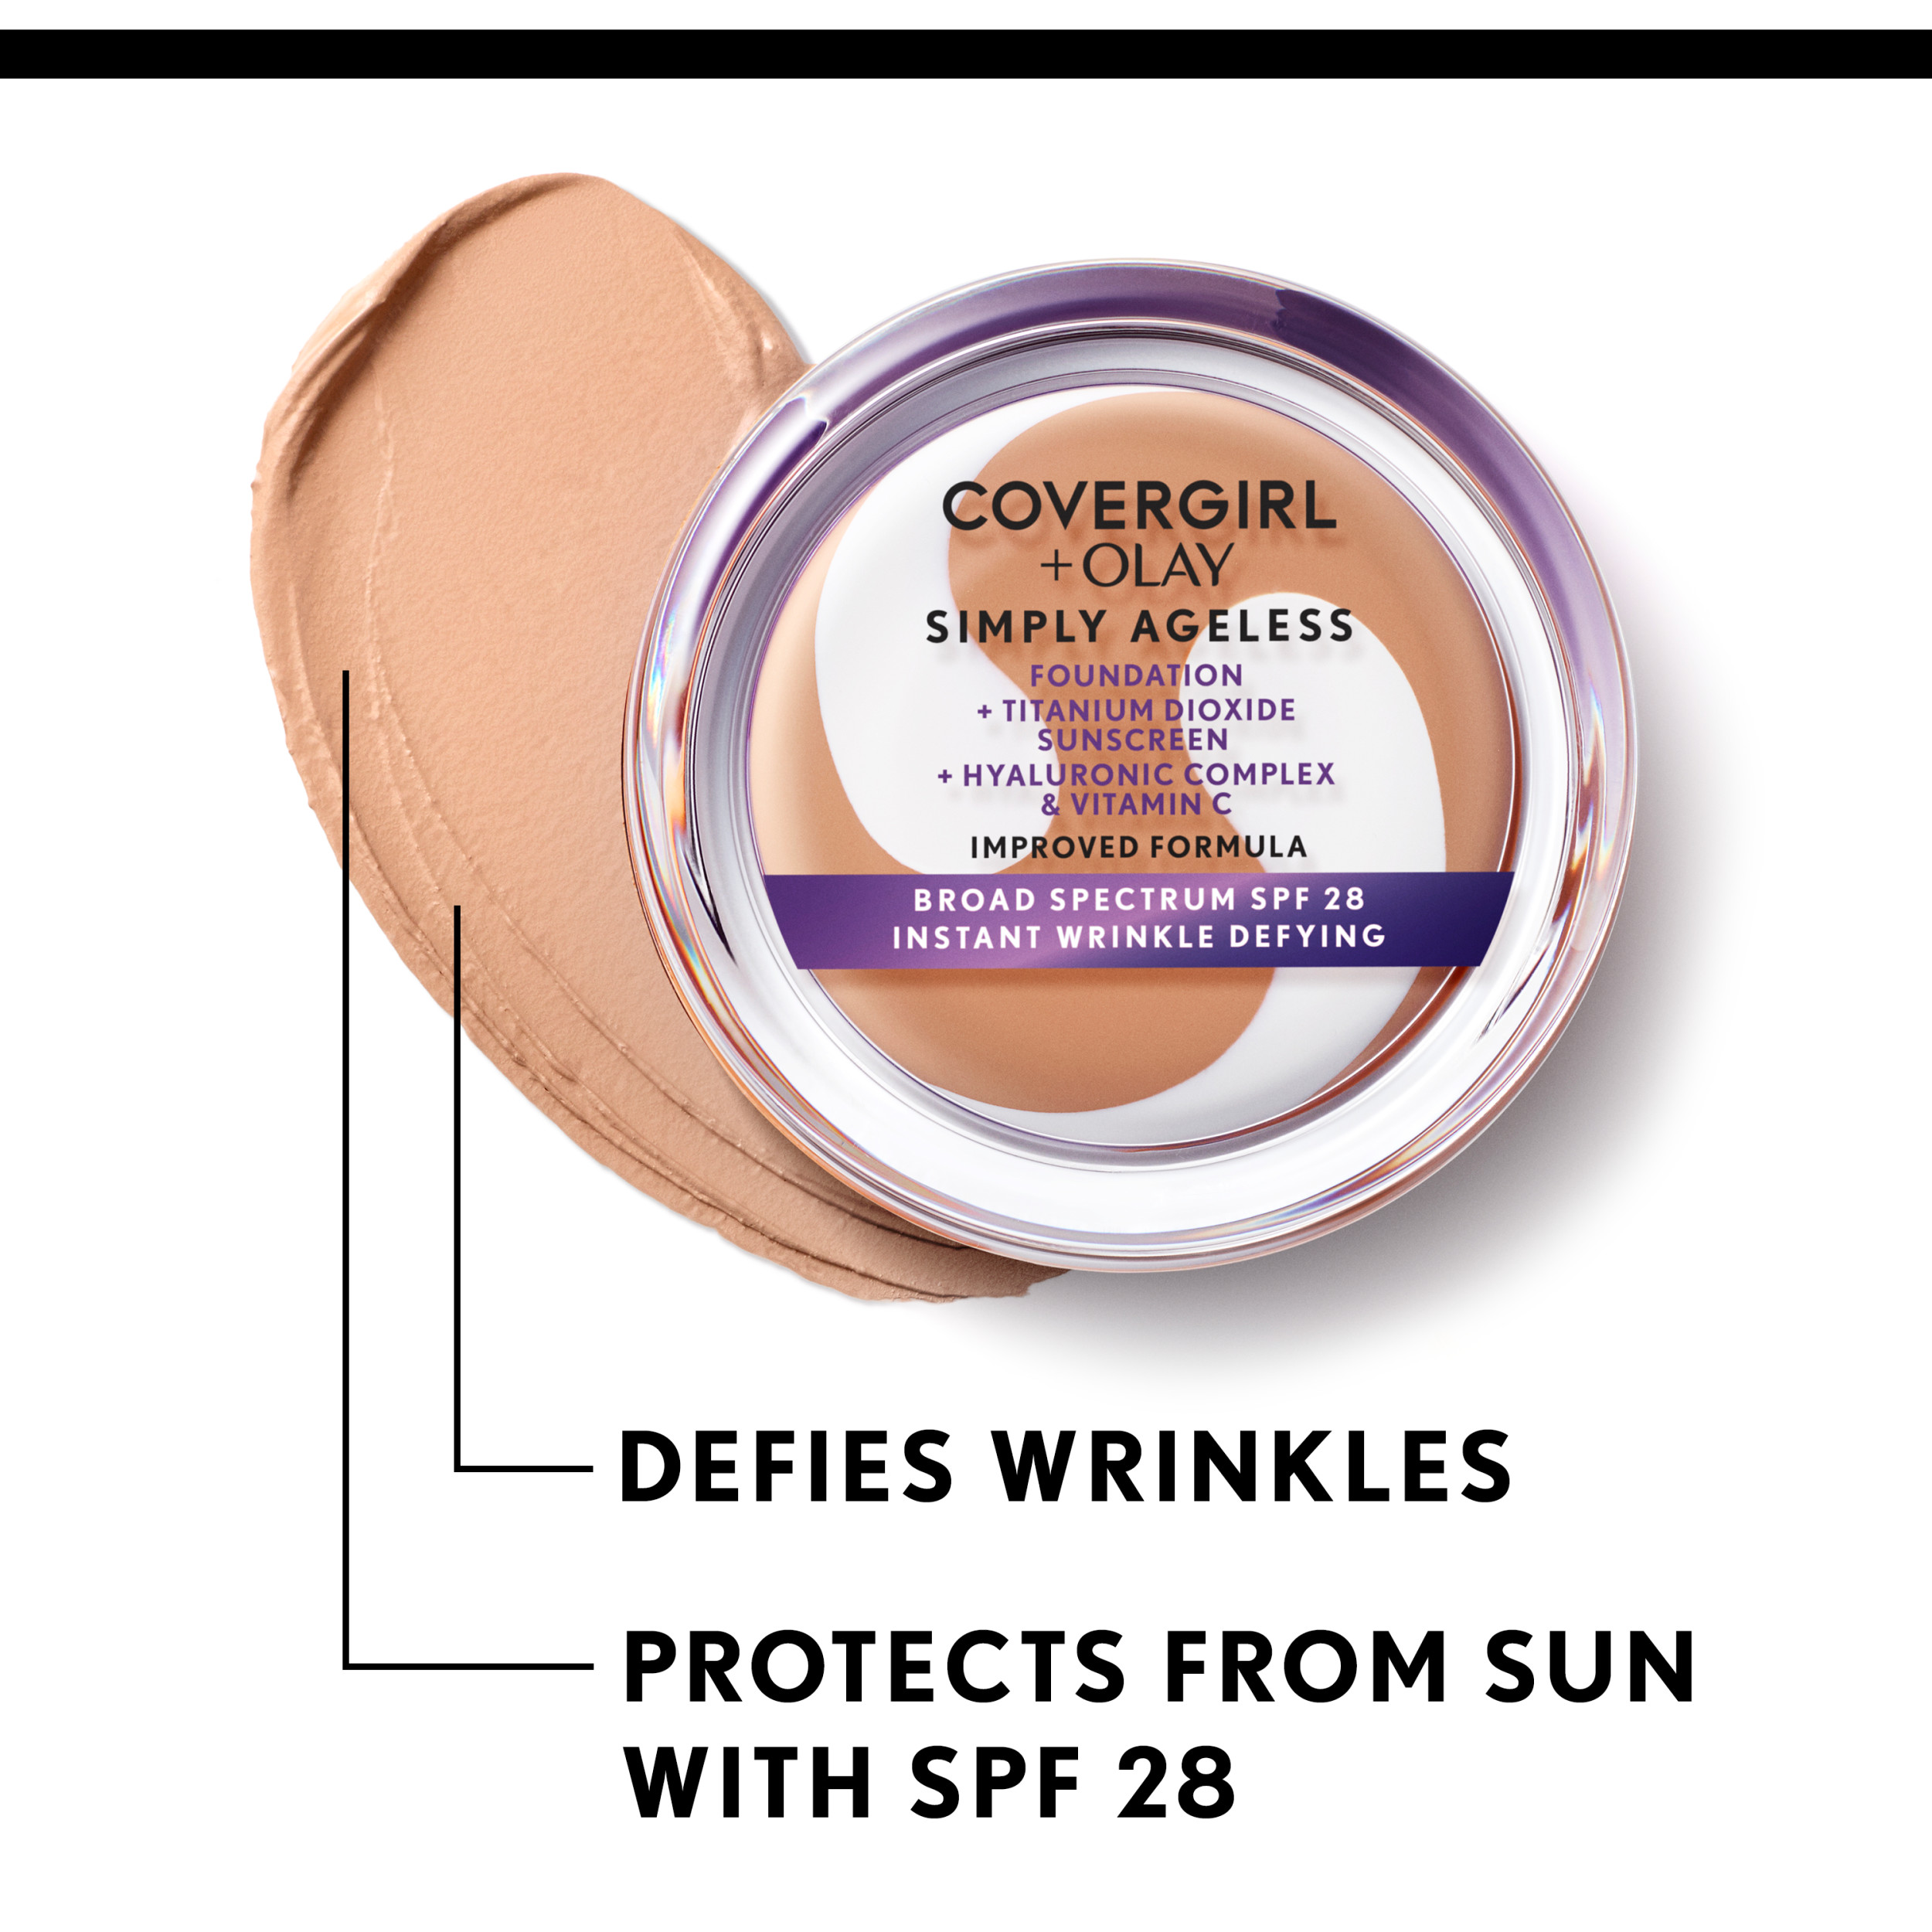 COVERGIRL + OLAY Simply Ageless Instant Wrinkle-Defying Foundation with SPF 28, Buff Beige, 0.44 oz - image 4 of 9